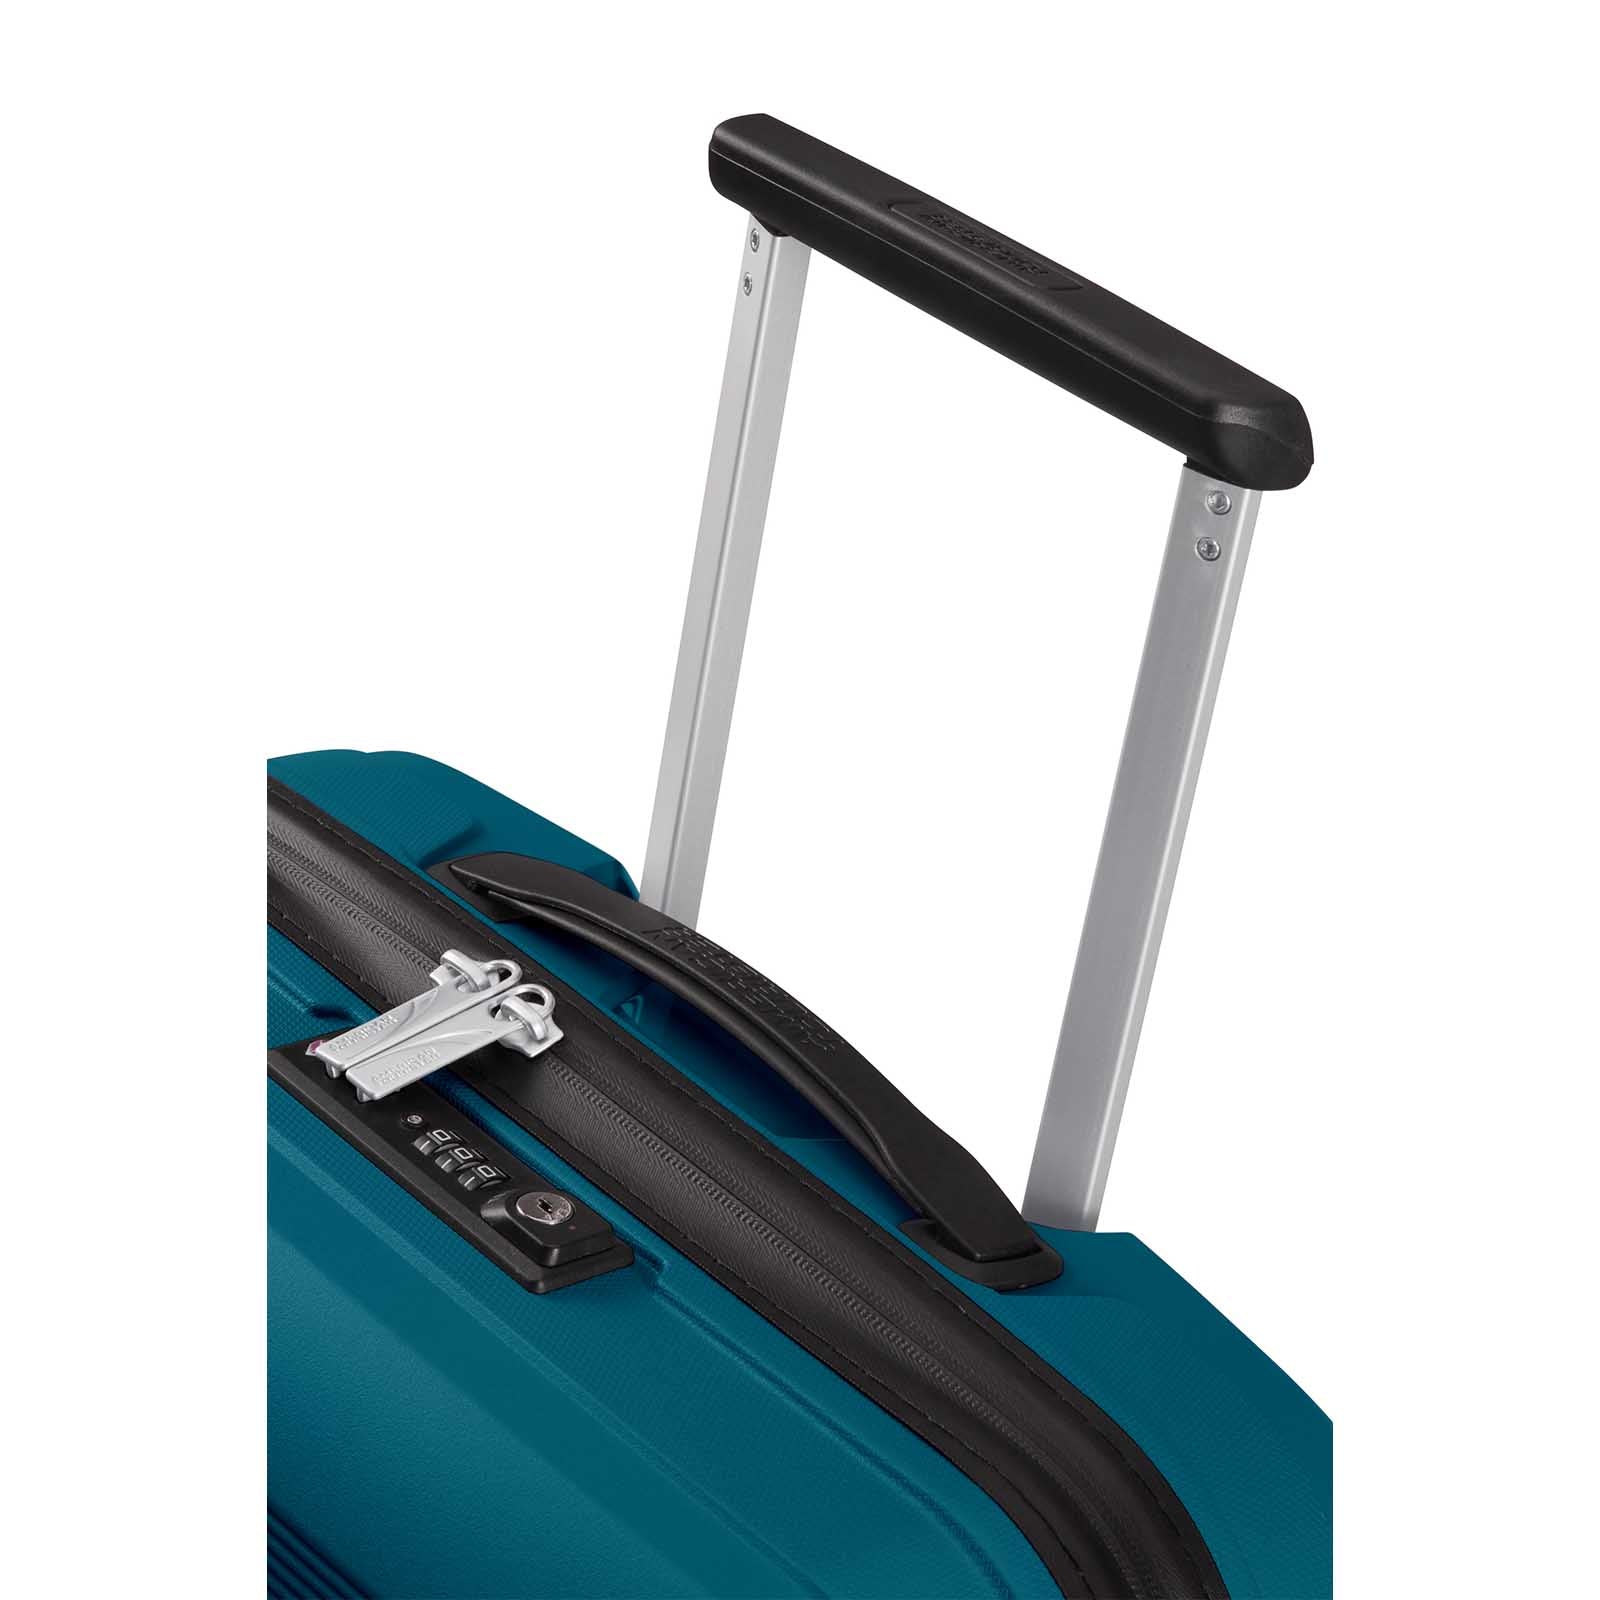 American-Tourister-Airconic-55cm-Carry-On-Suitcase-Deep-Ocean-Trolley